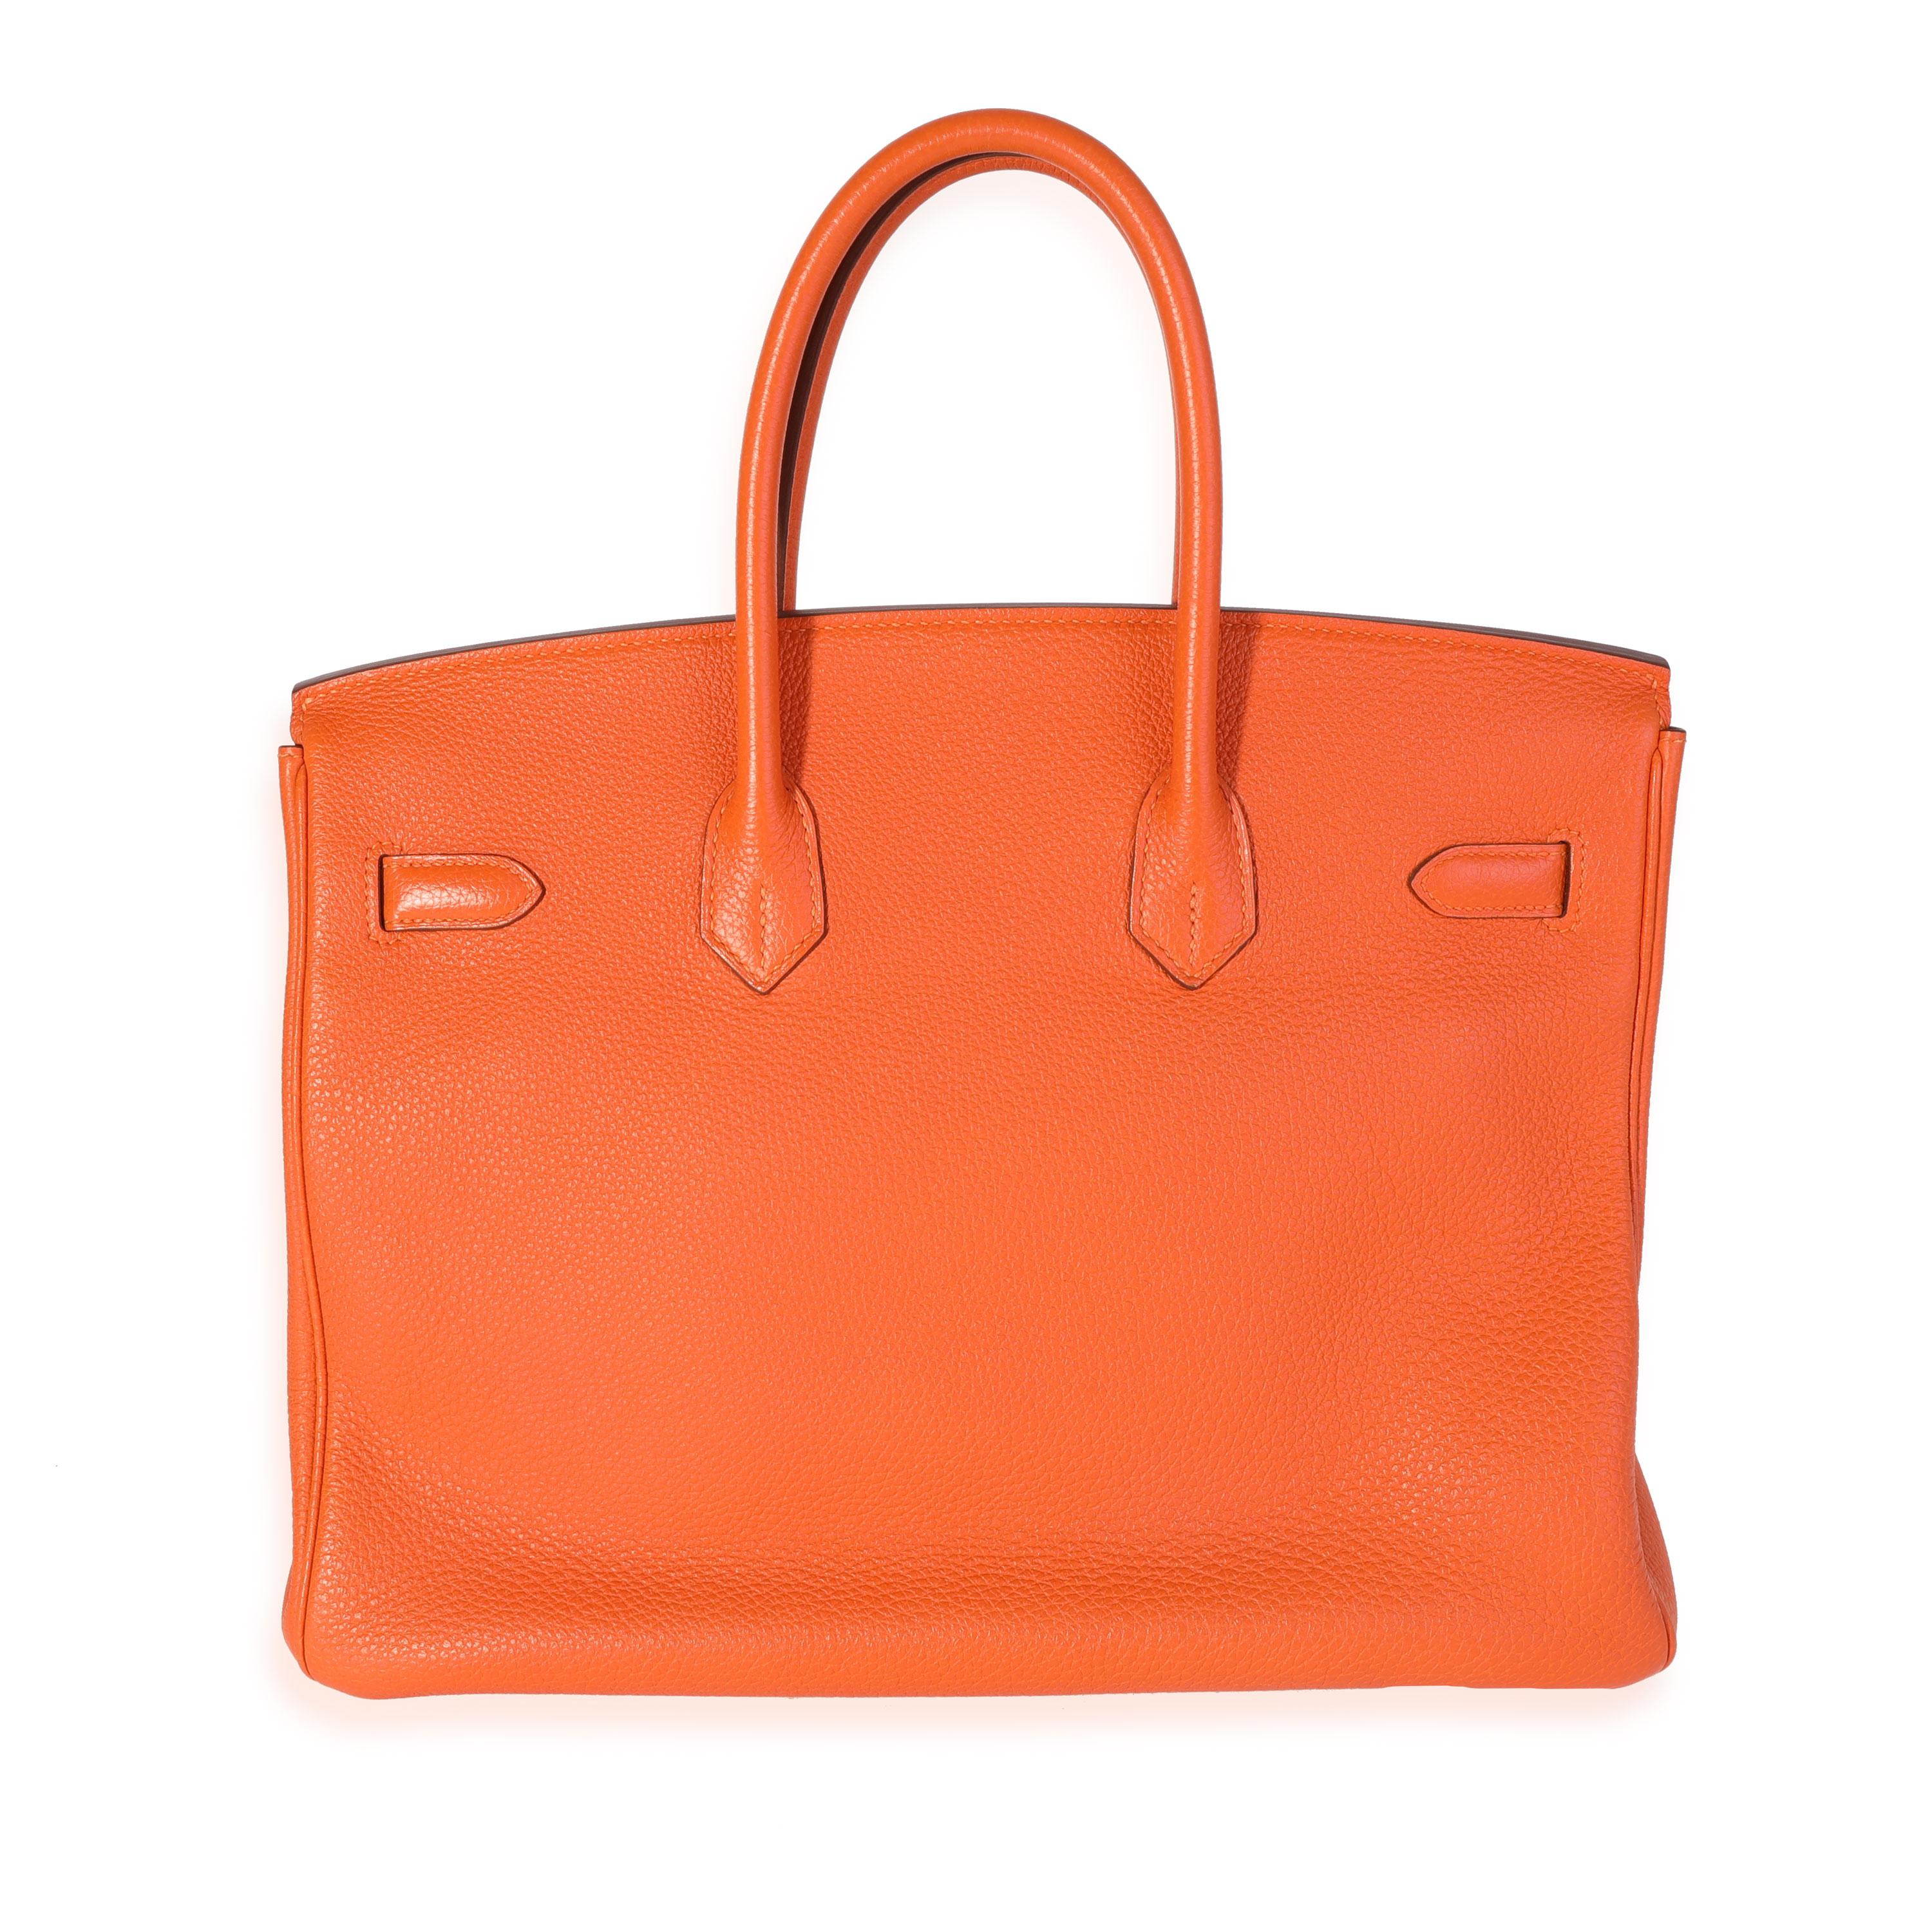 Listing Title: Hermès Orange Togo Birkin 35 GHW
SKU: 119686
Condition: Pre-owned (3000)
Handbag Condition: Very Good
Condition Comments: Very Good Condition. Scuffing to corners and exterior. Light discoloration to leather. Scratching to hardware.